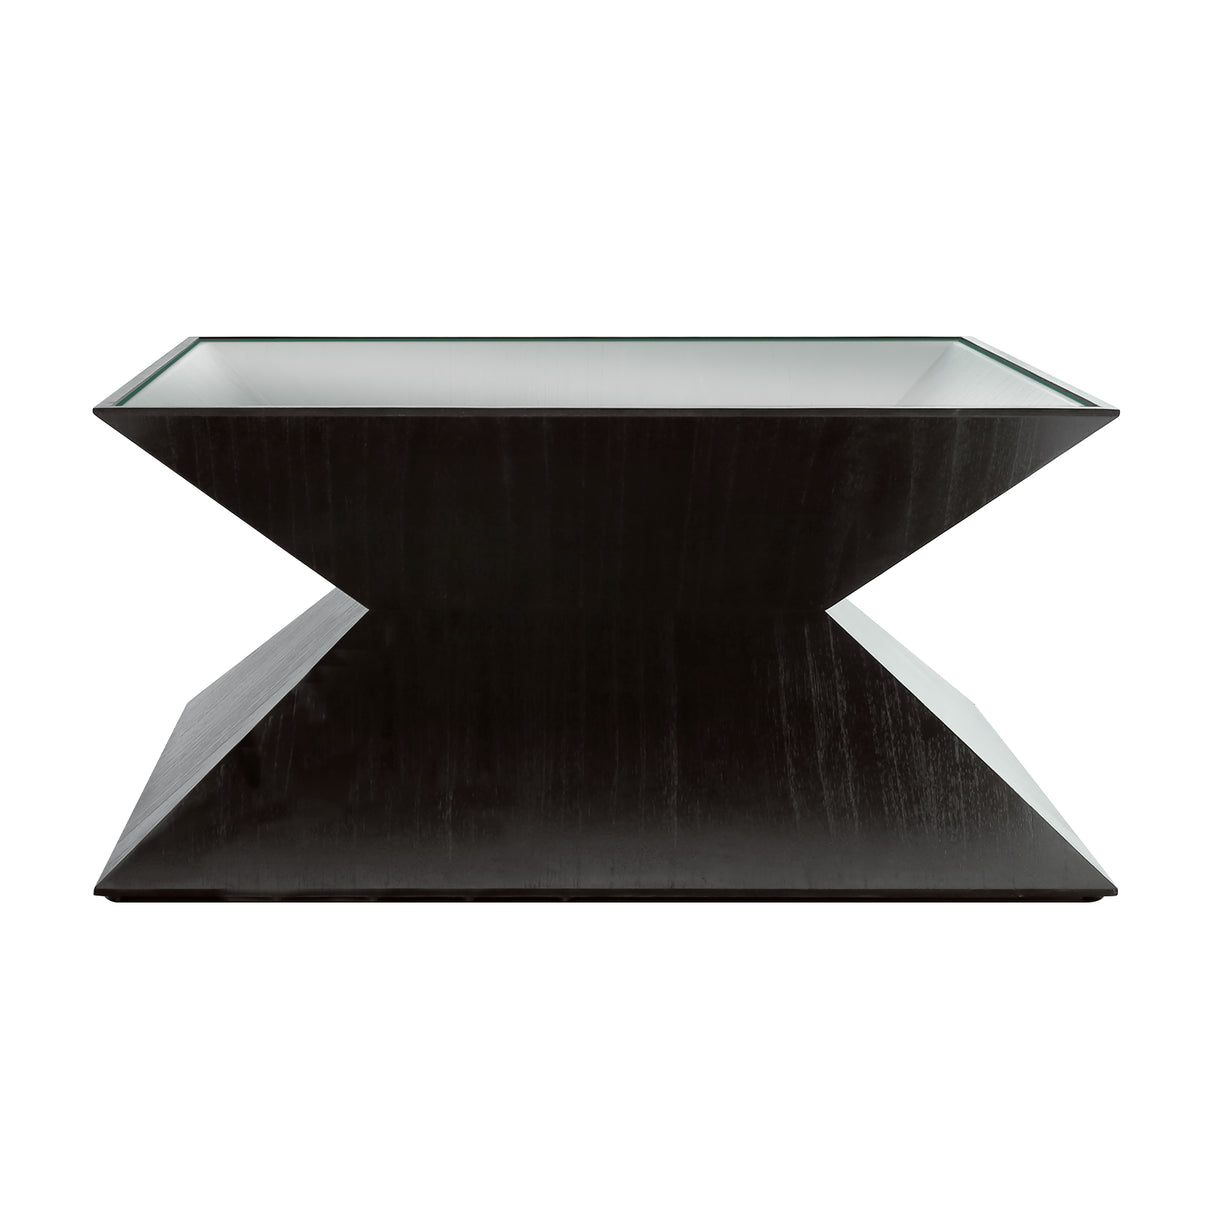 Elk S0075-9862 Checkmate Coffee Table - Checkmate Black